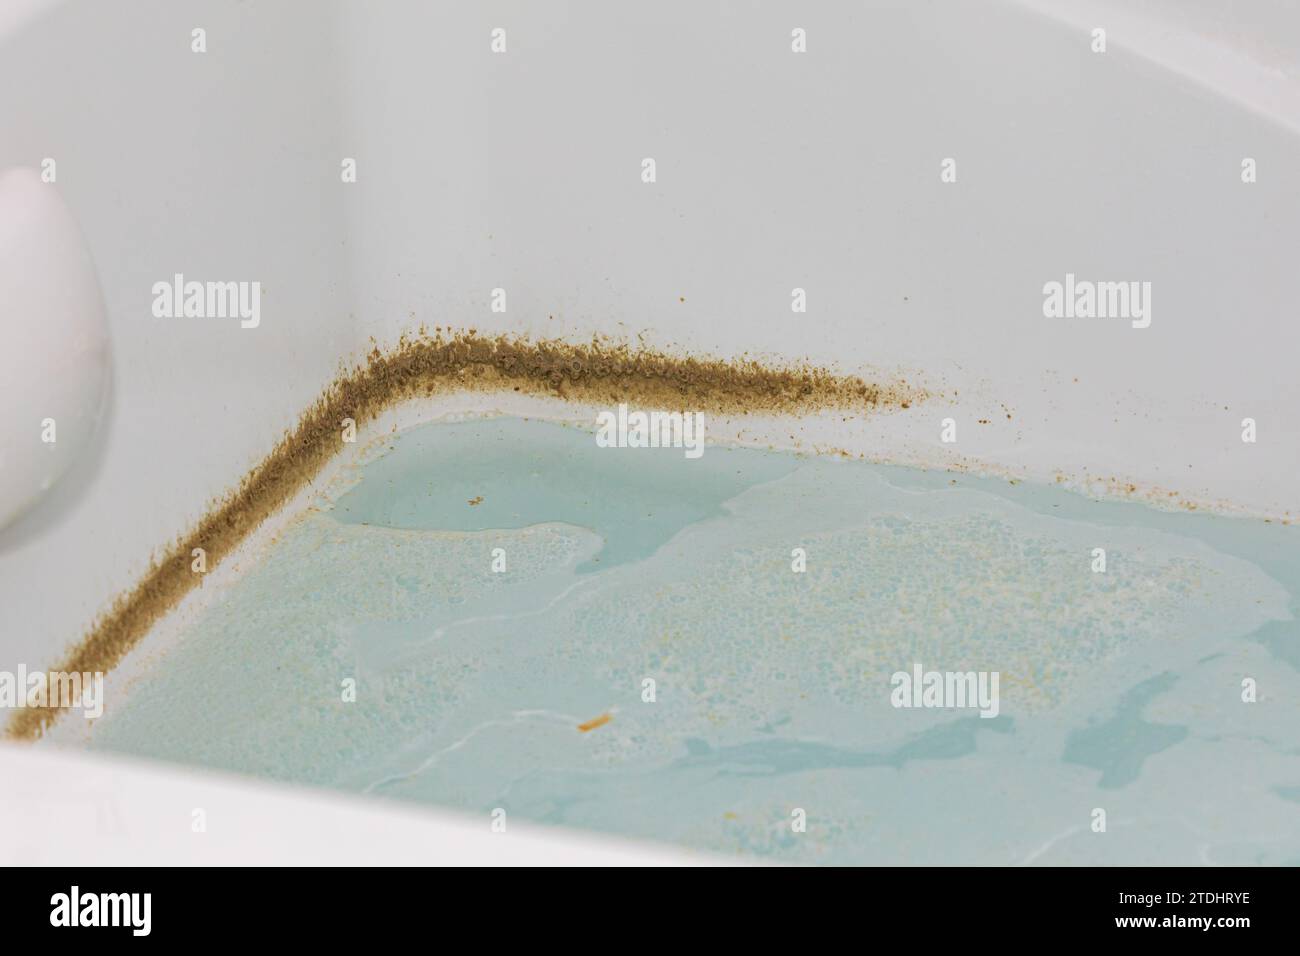 Whirlpool tub or jetted bathtub with dirty water. Household chores, bathroom cleaning and housekeeping concept. Stock Photo